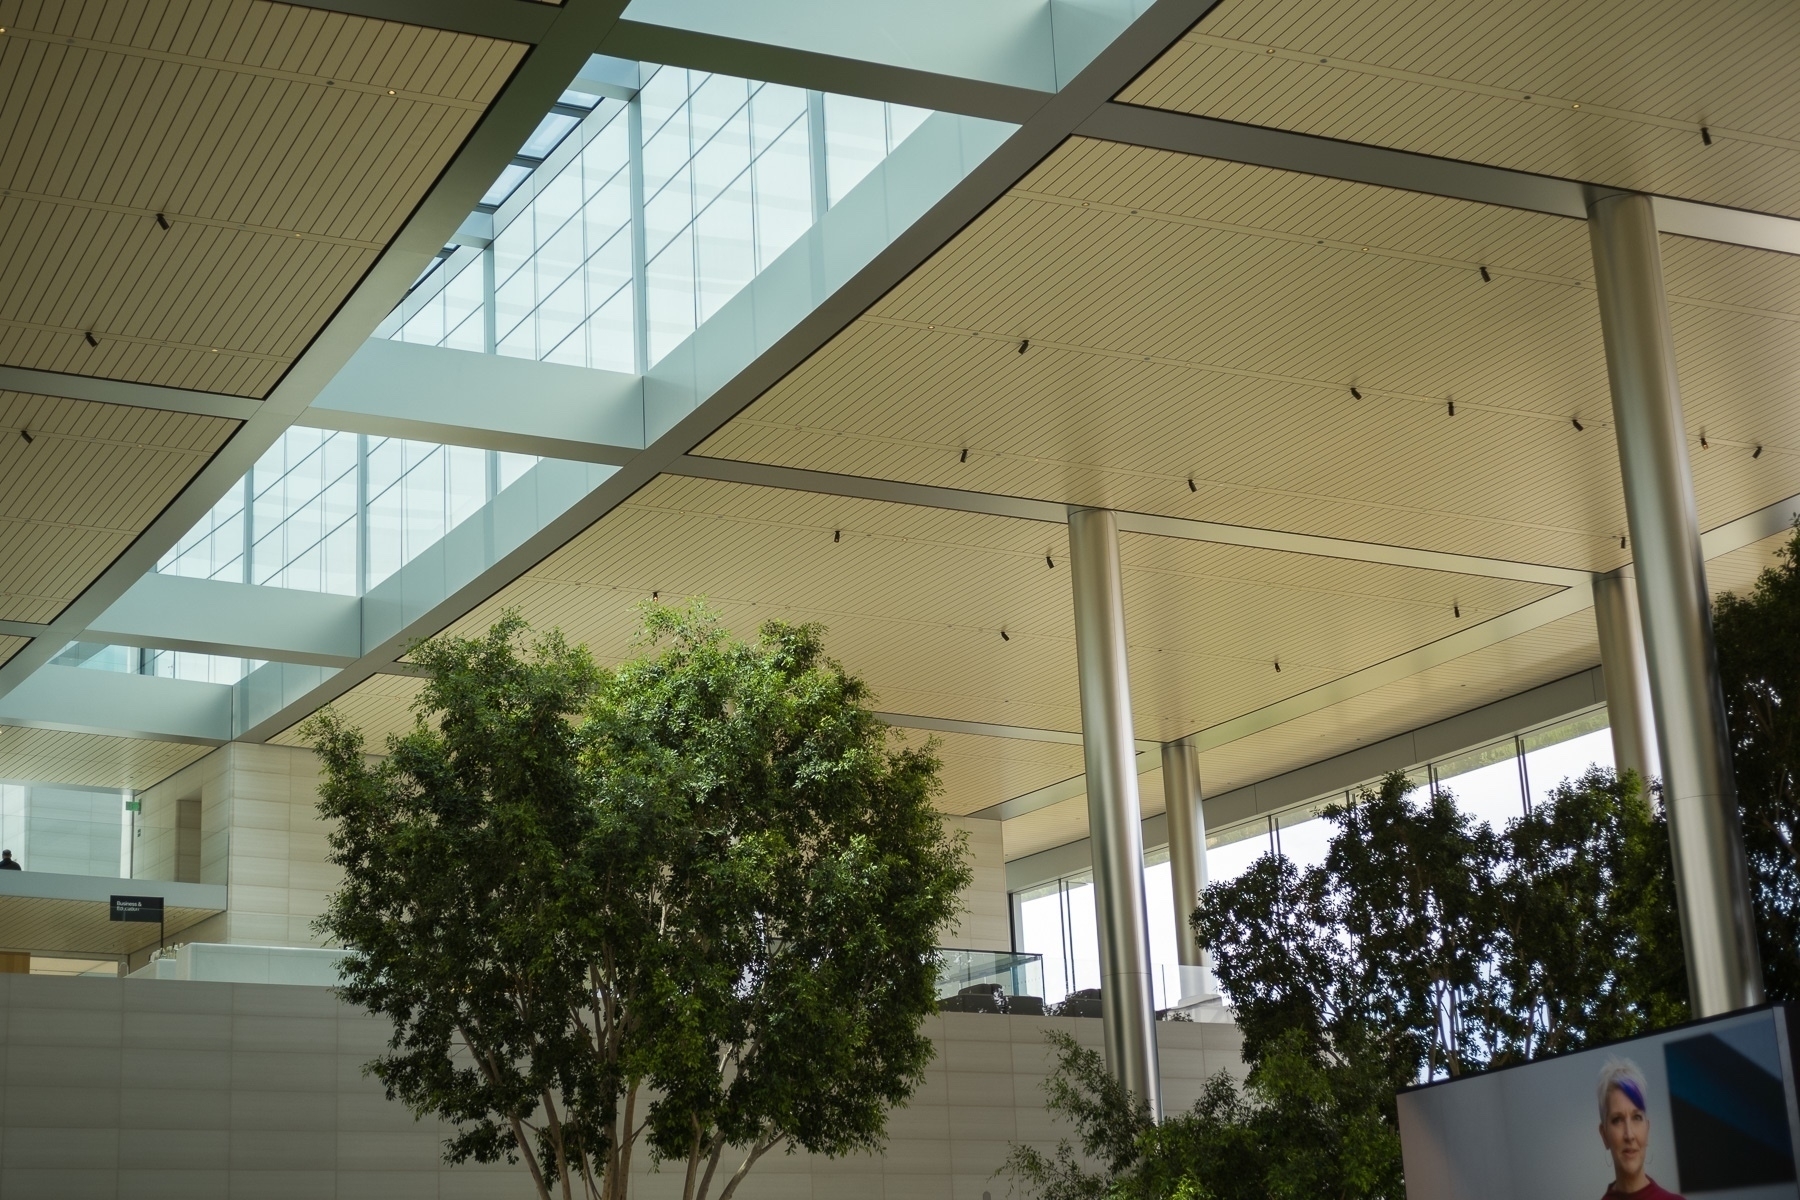 Curved ceilings and windows let in sunlight high above the hall. The tops of steel pillars and indoor trees are also visible.